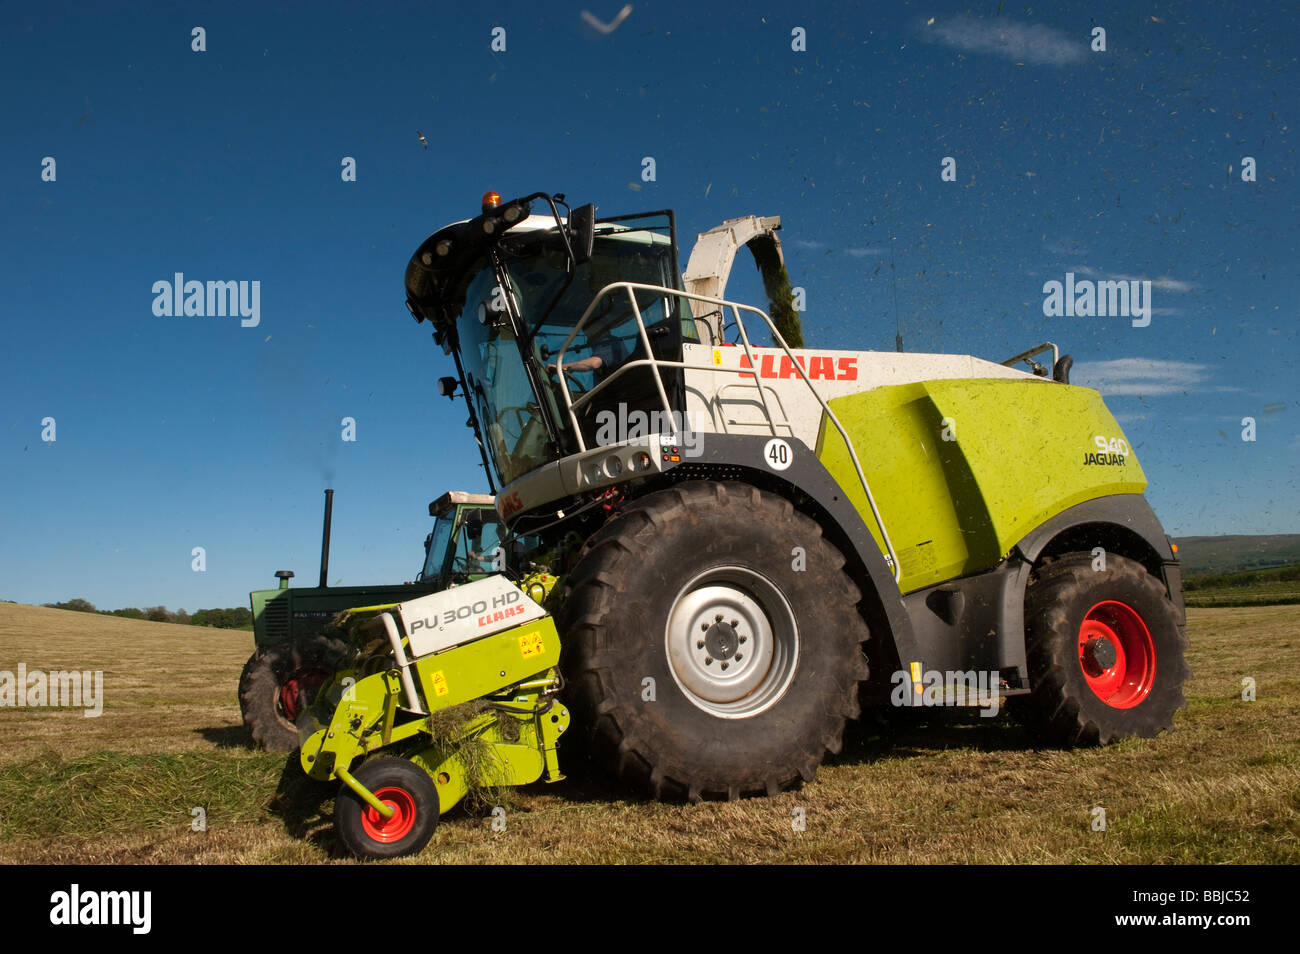 Claas 940 self propelled forage harvestor working in field Filling trailers with chopped grass Cumbria  Stock Photo